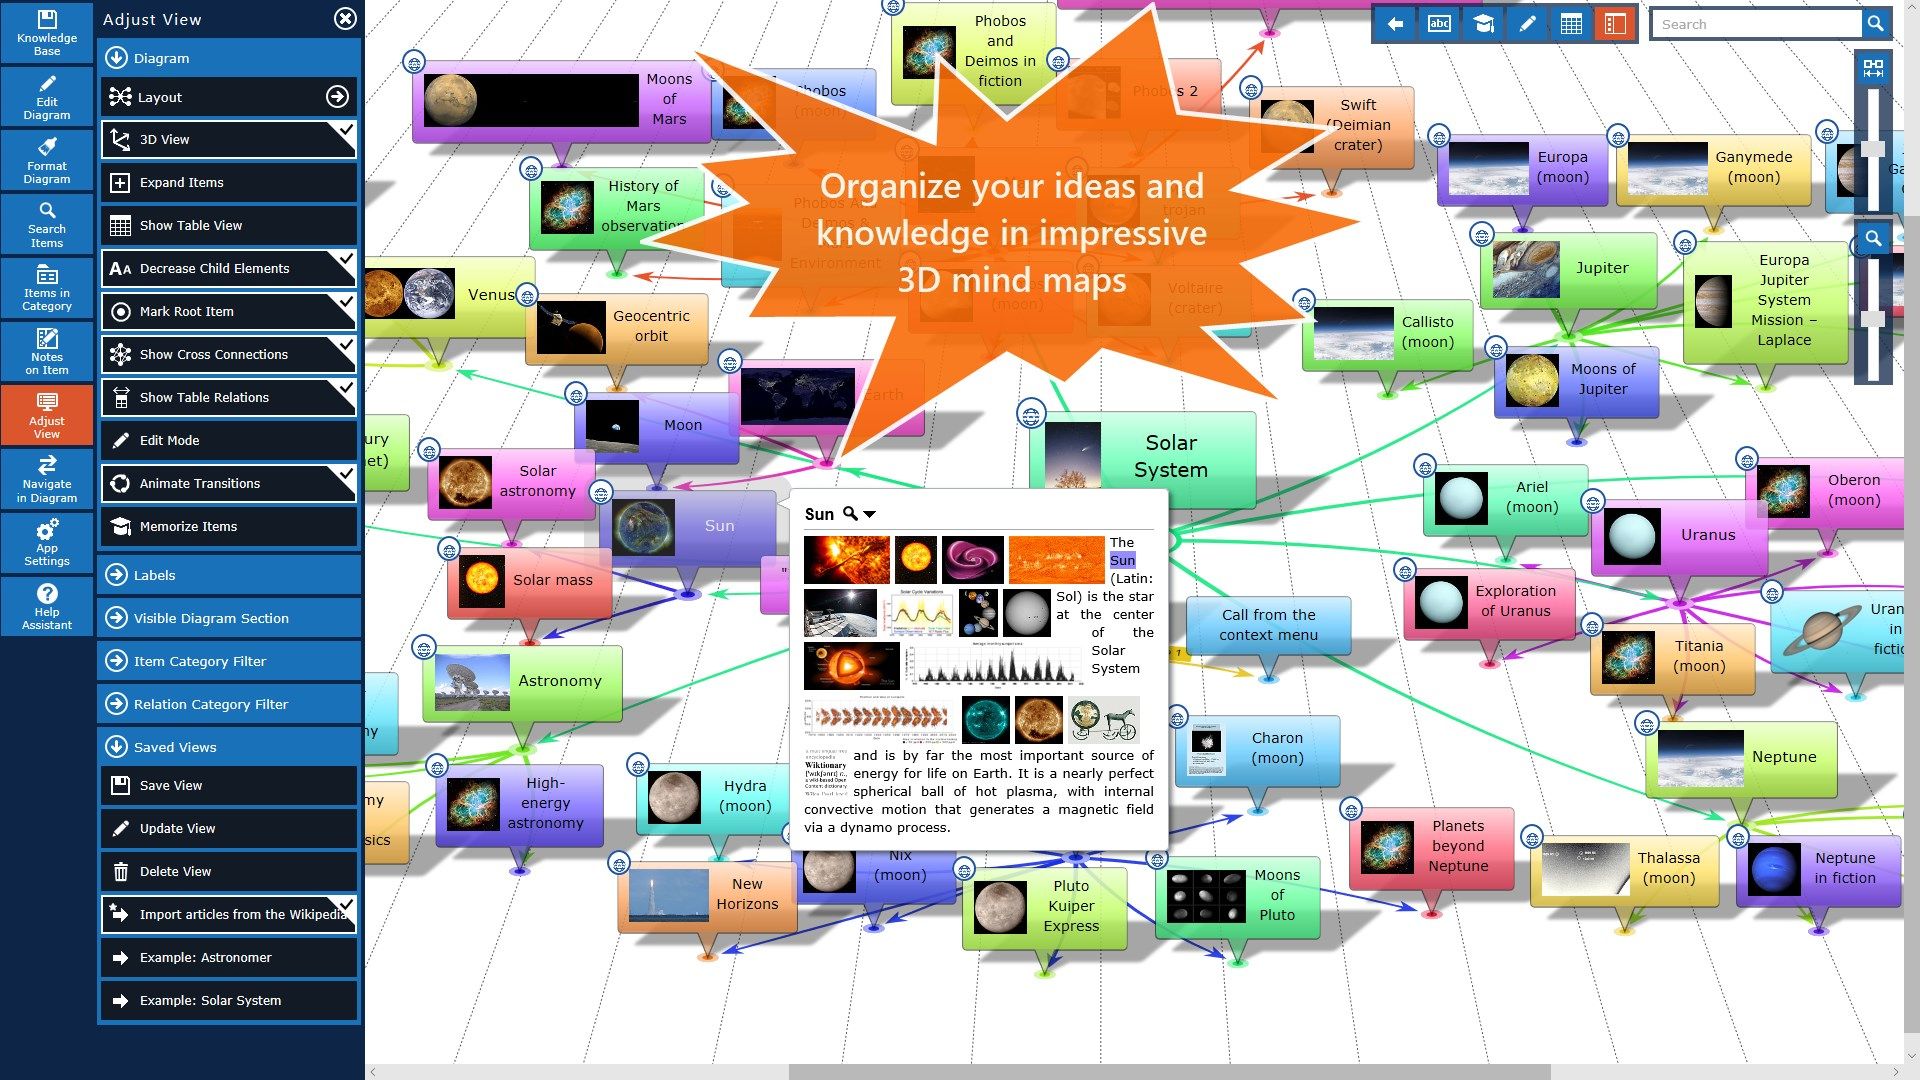 Organize your ideas and knowledge in impressive 3D mind maps